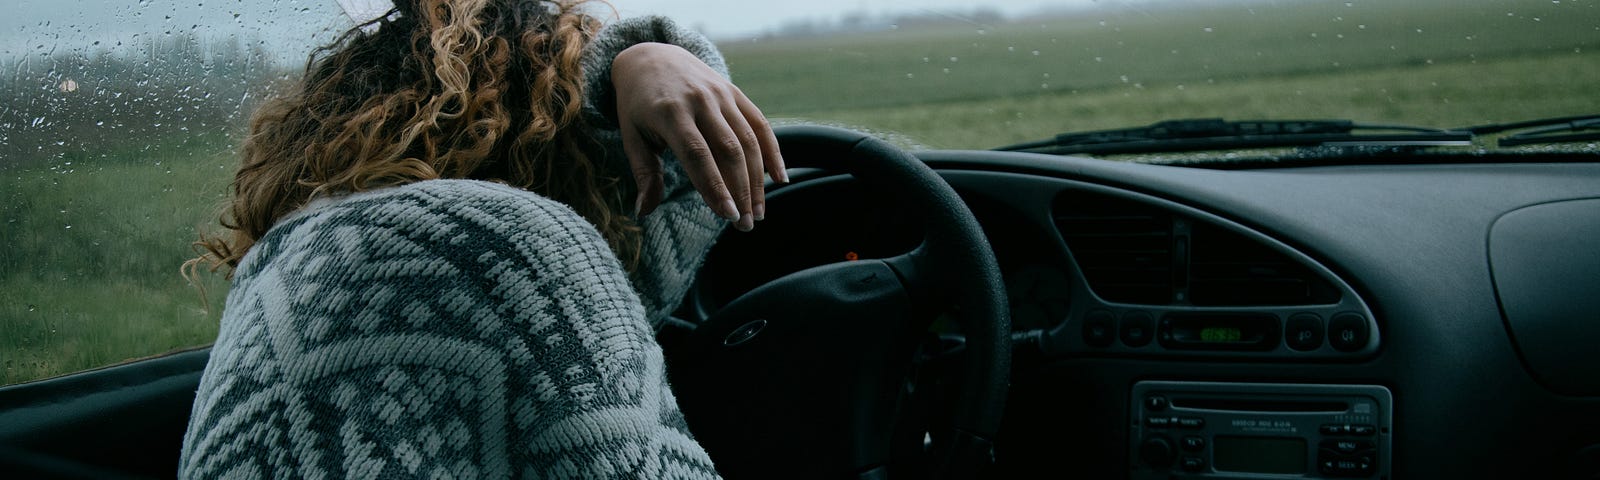 Women in car with her head on the steering wheel.